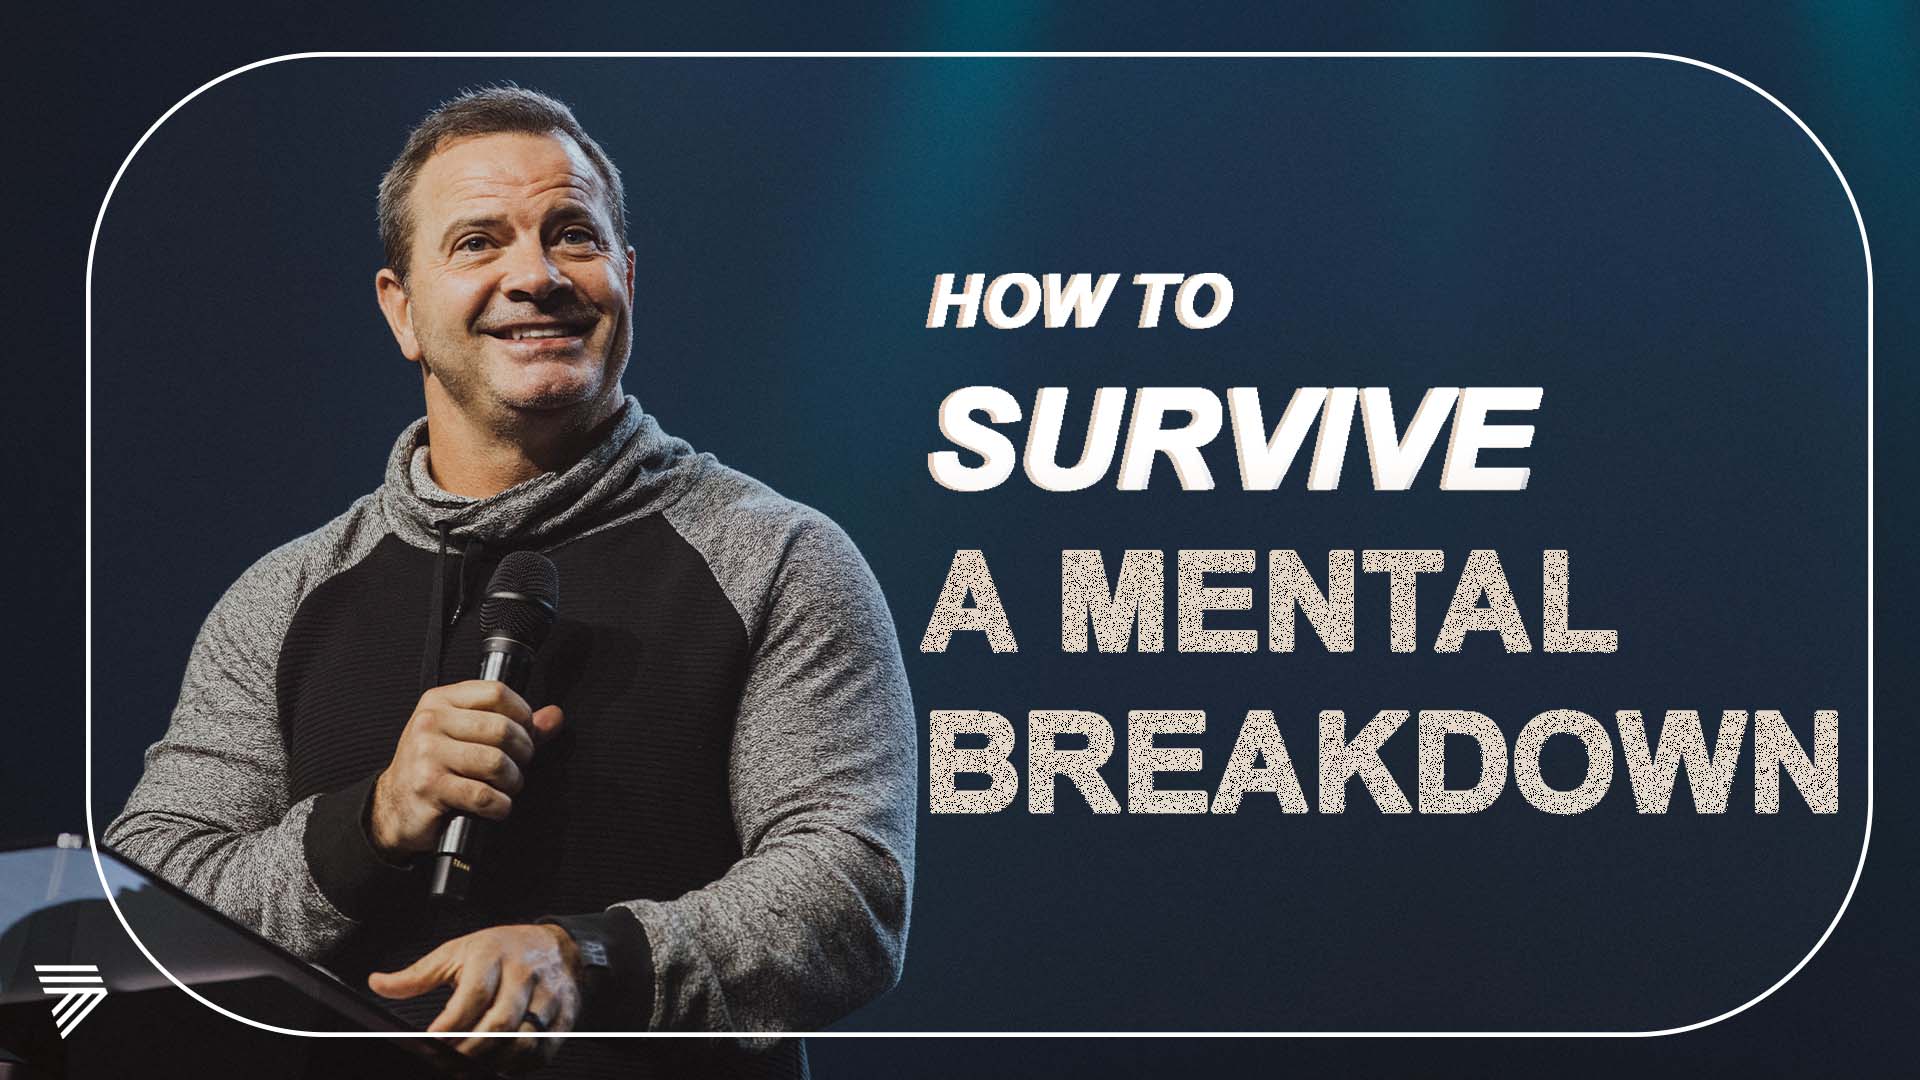 How to Survive a Mental Breakdown